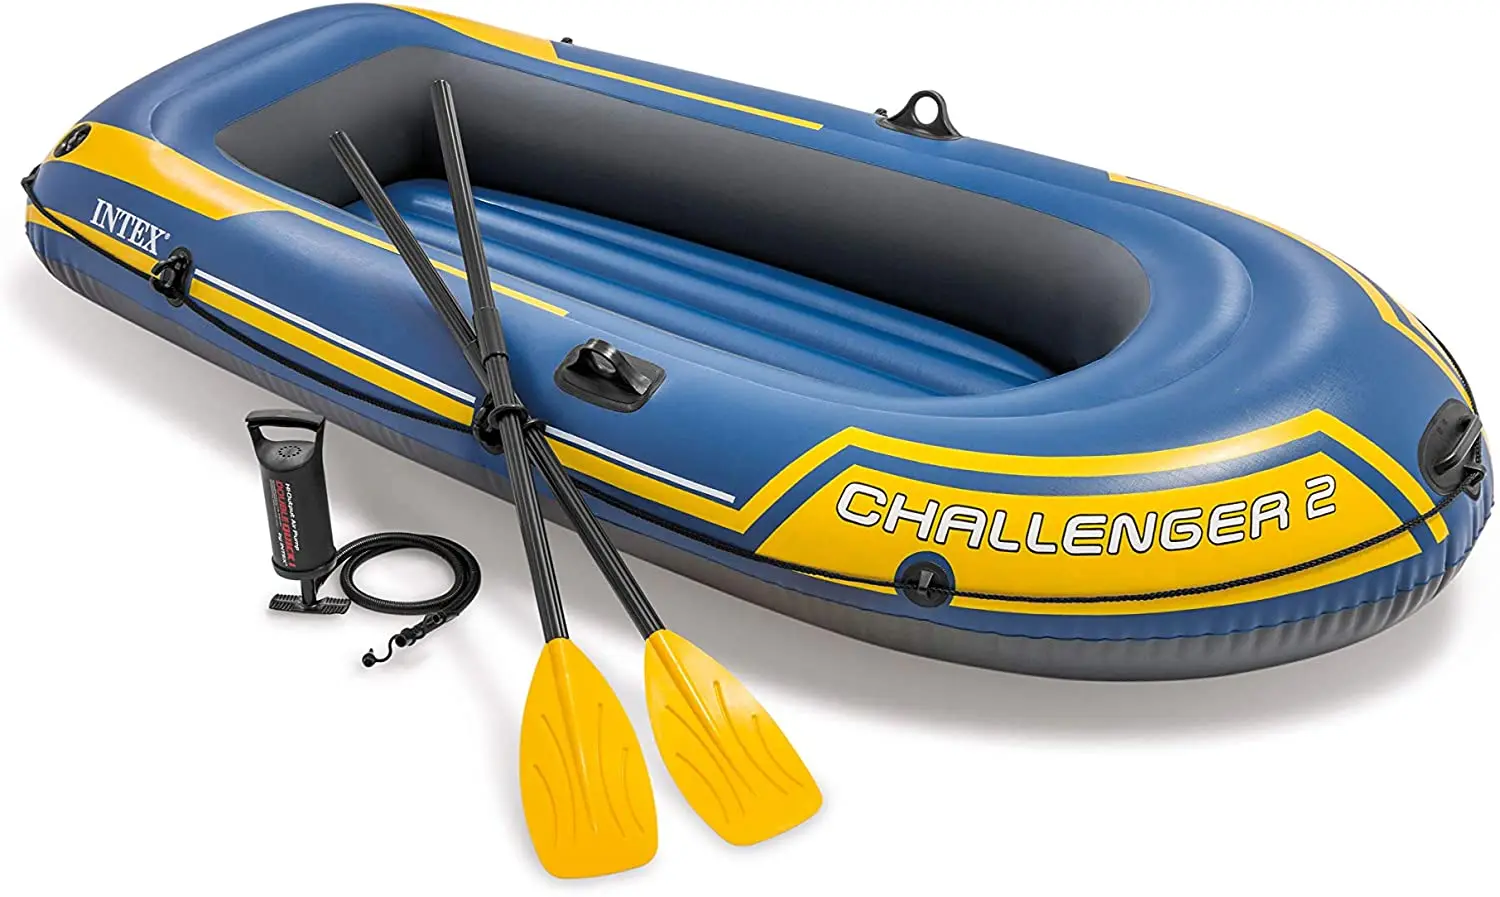 

BETTERLIFE OUTDOOR INTEX Challenger 2 Person Rowing Boat Inflatable Raft Boat Set with-Pump and Oars, Blue